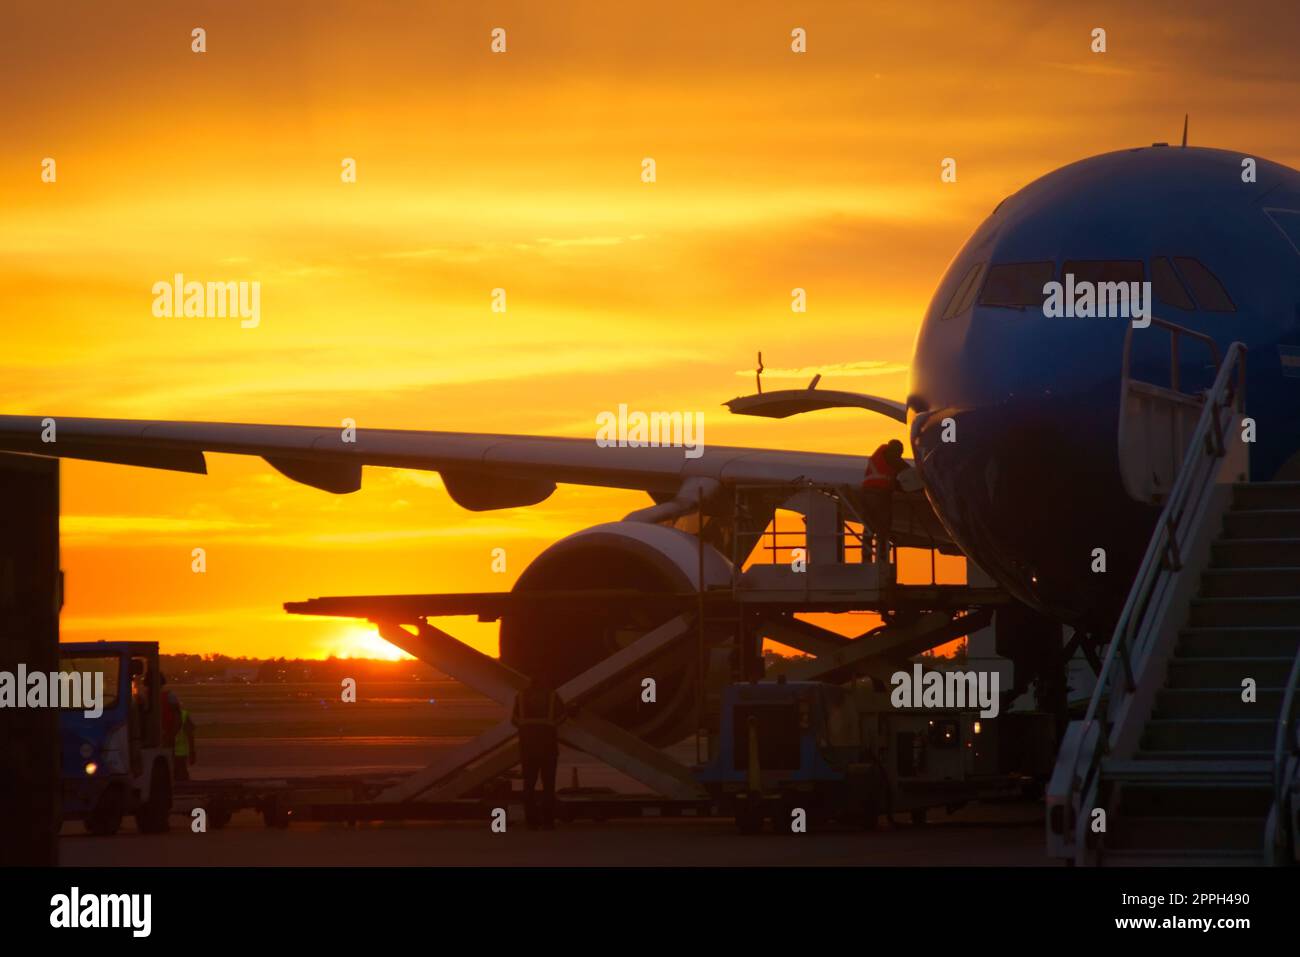 Airport ground crew loading cargo and luggage on a commercial aircraft at dawn. Stock Photo